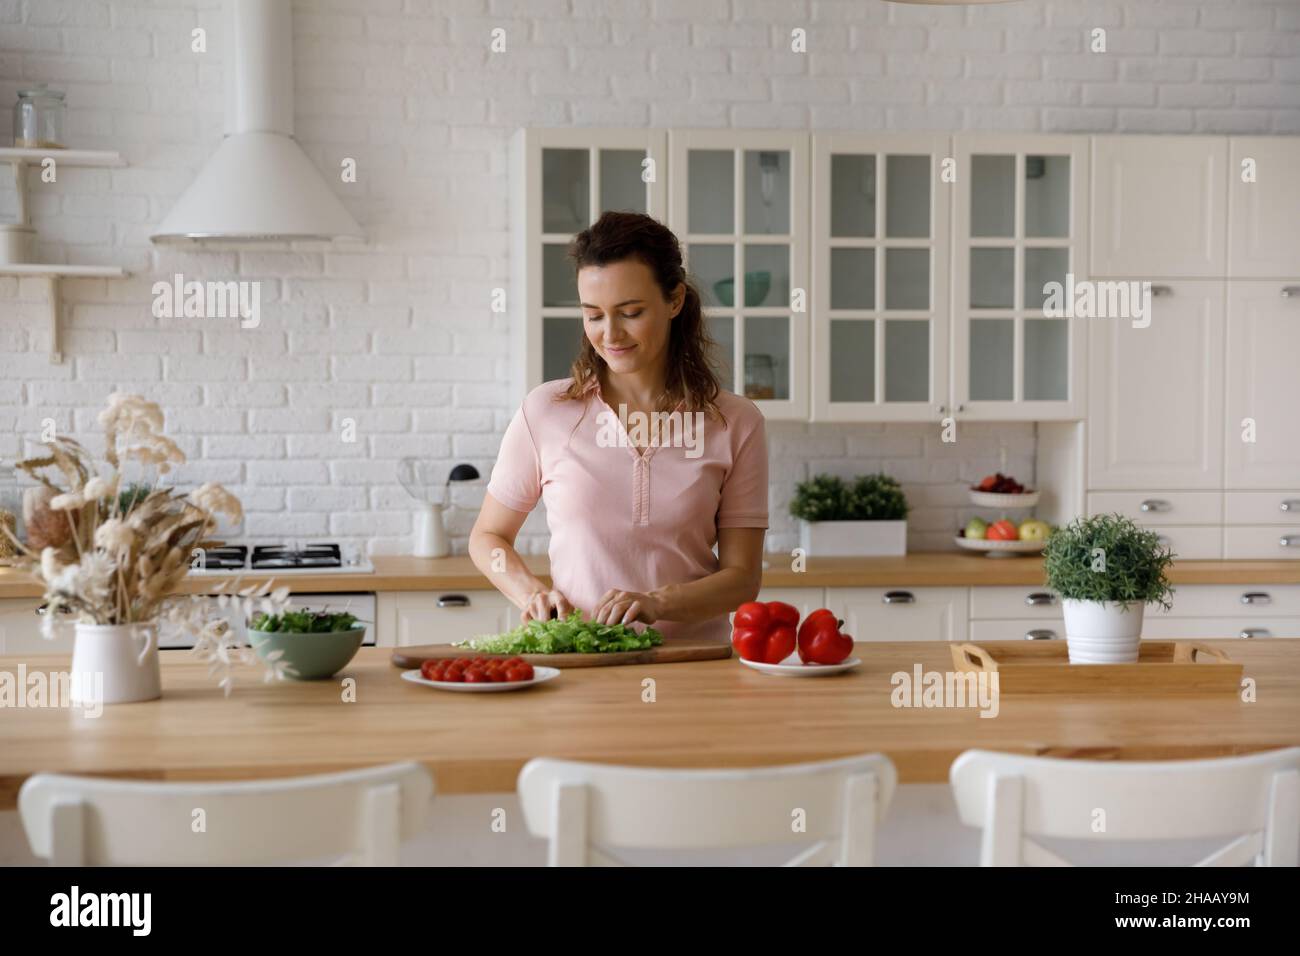 Happy homeowner woman cutting vegetables for salad in home kitchen Stock Photo